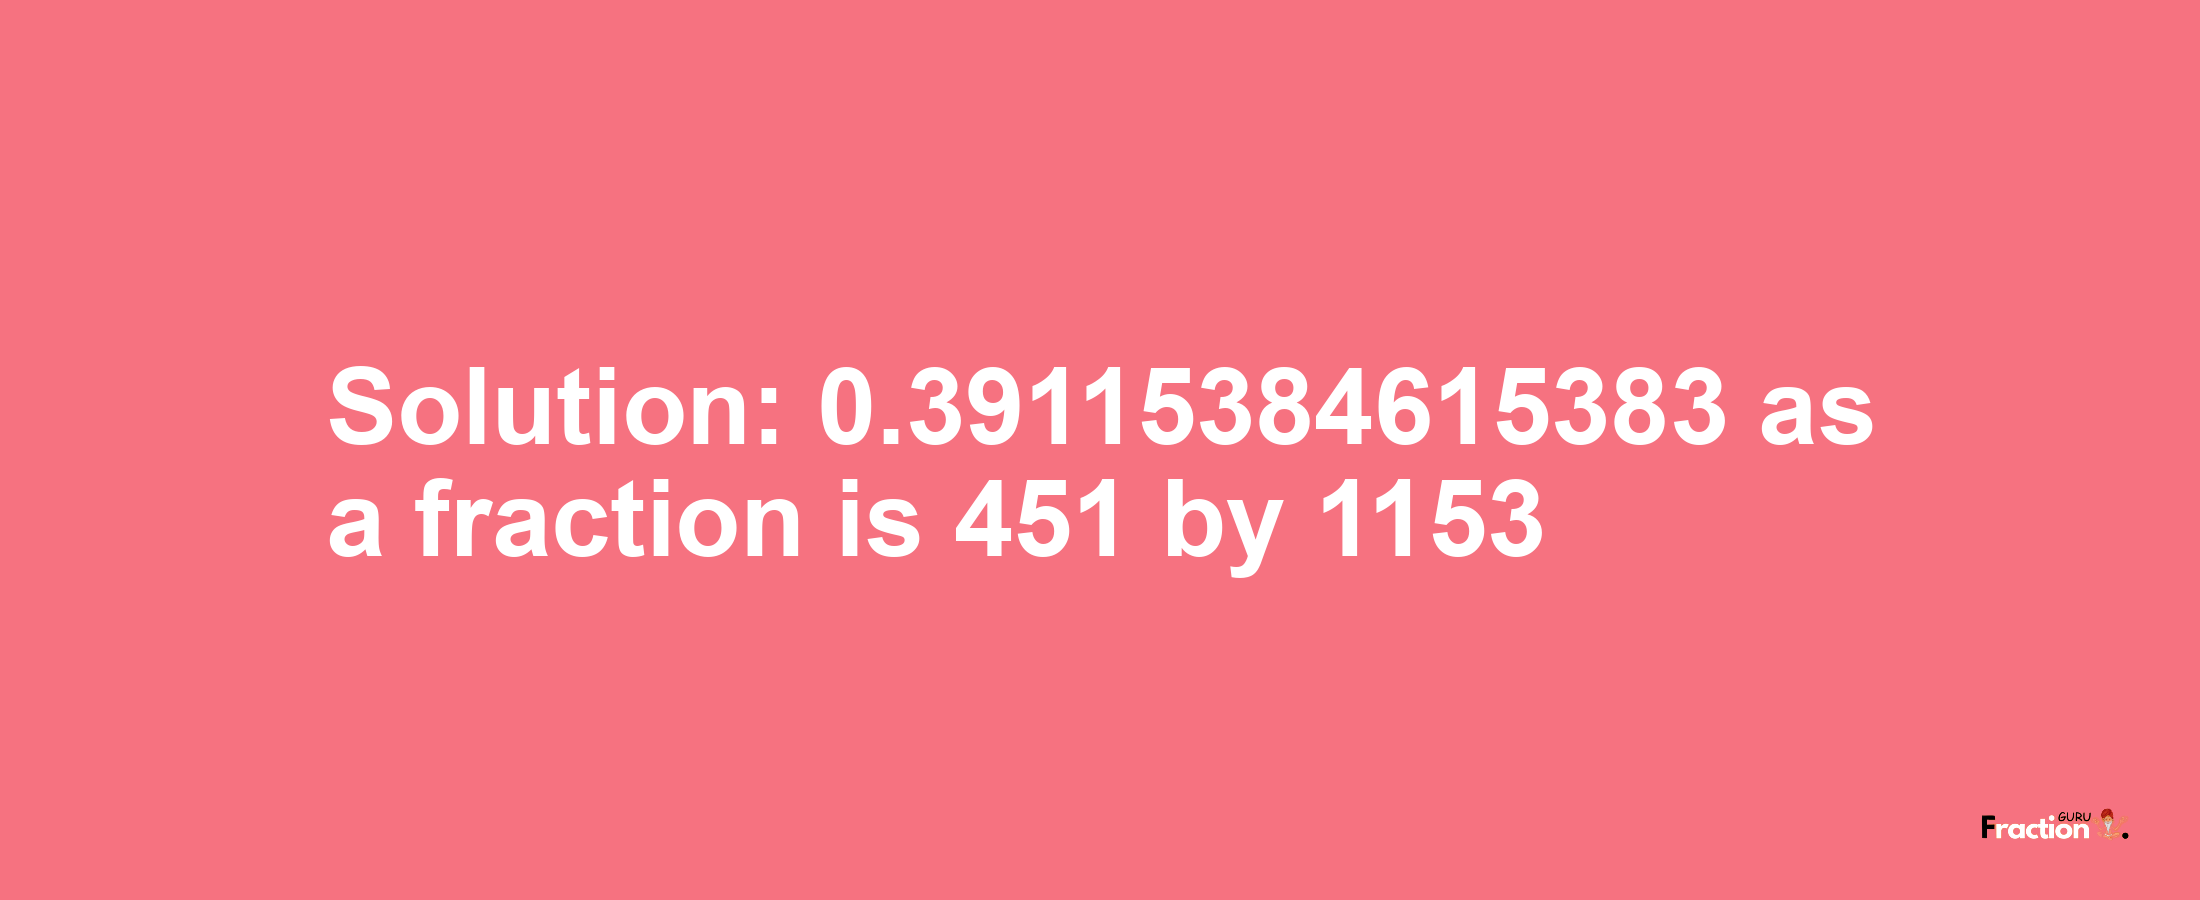 Solution:0.39115384615383 as a fraction is 451/1153